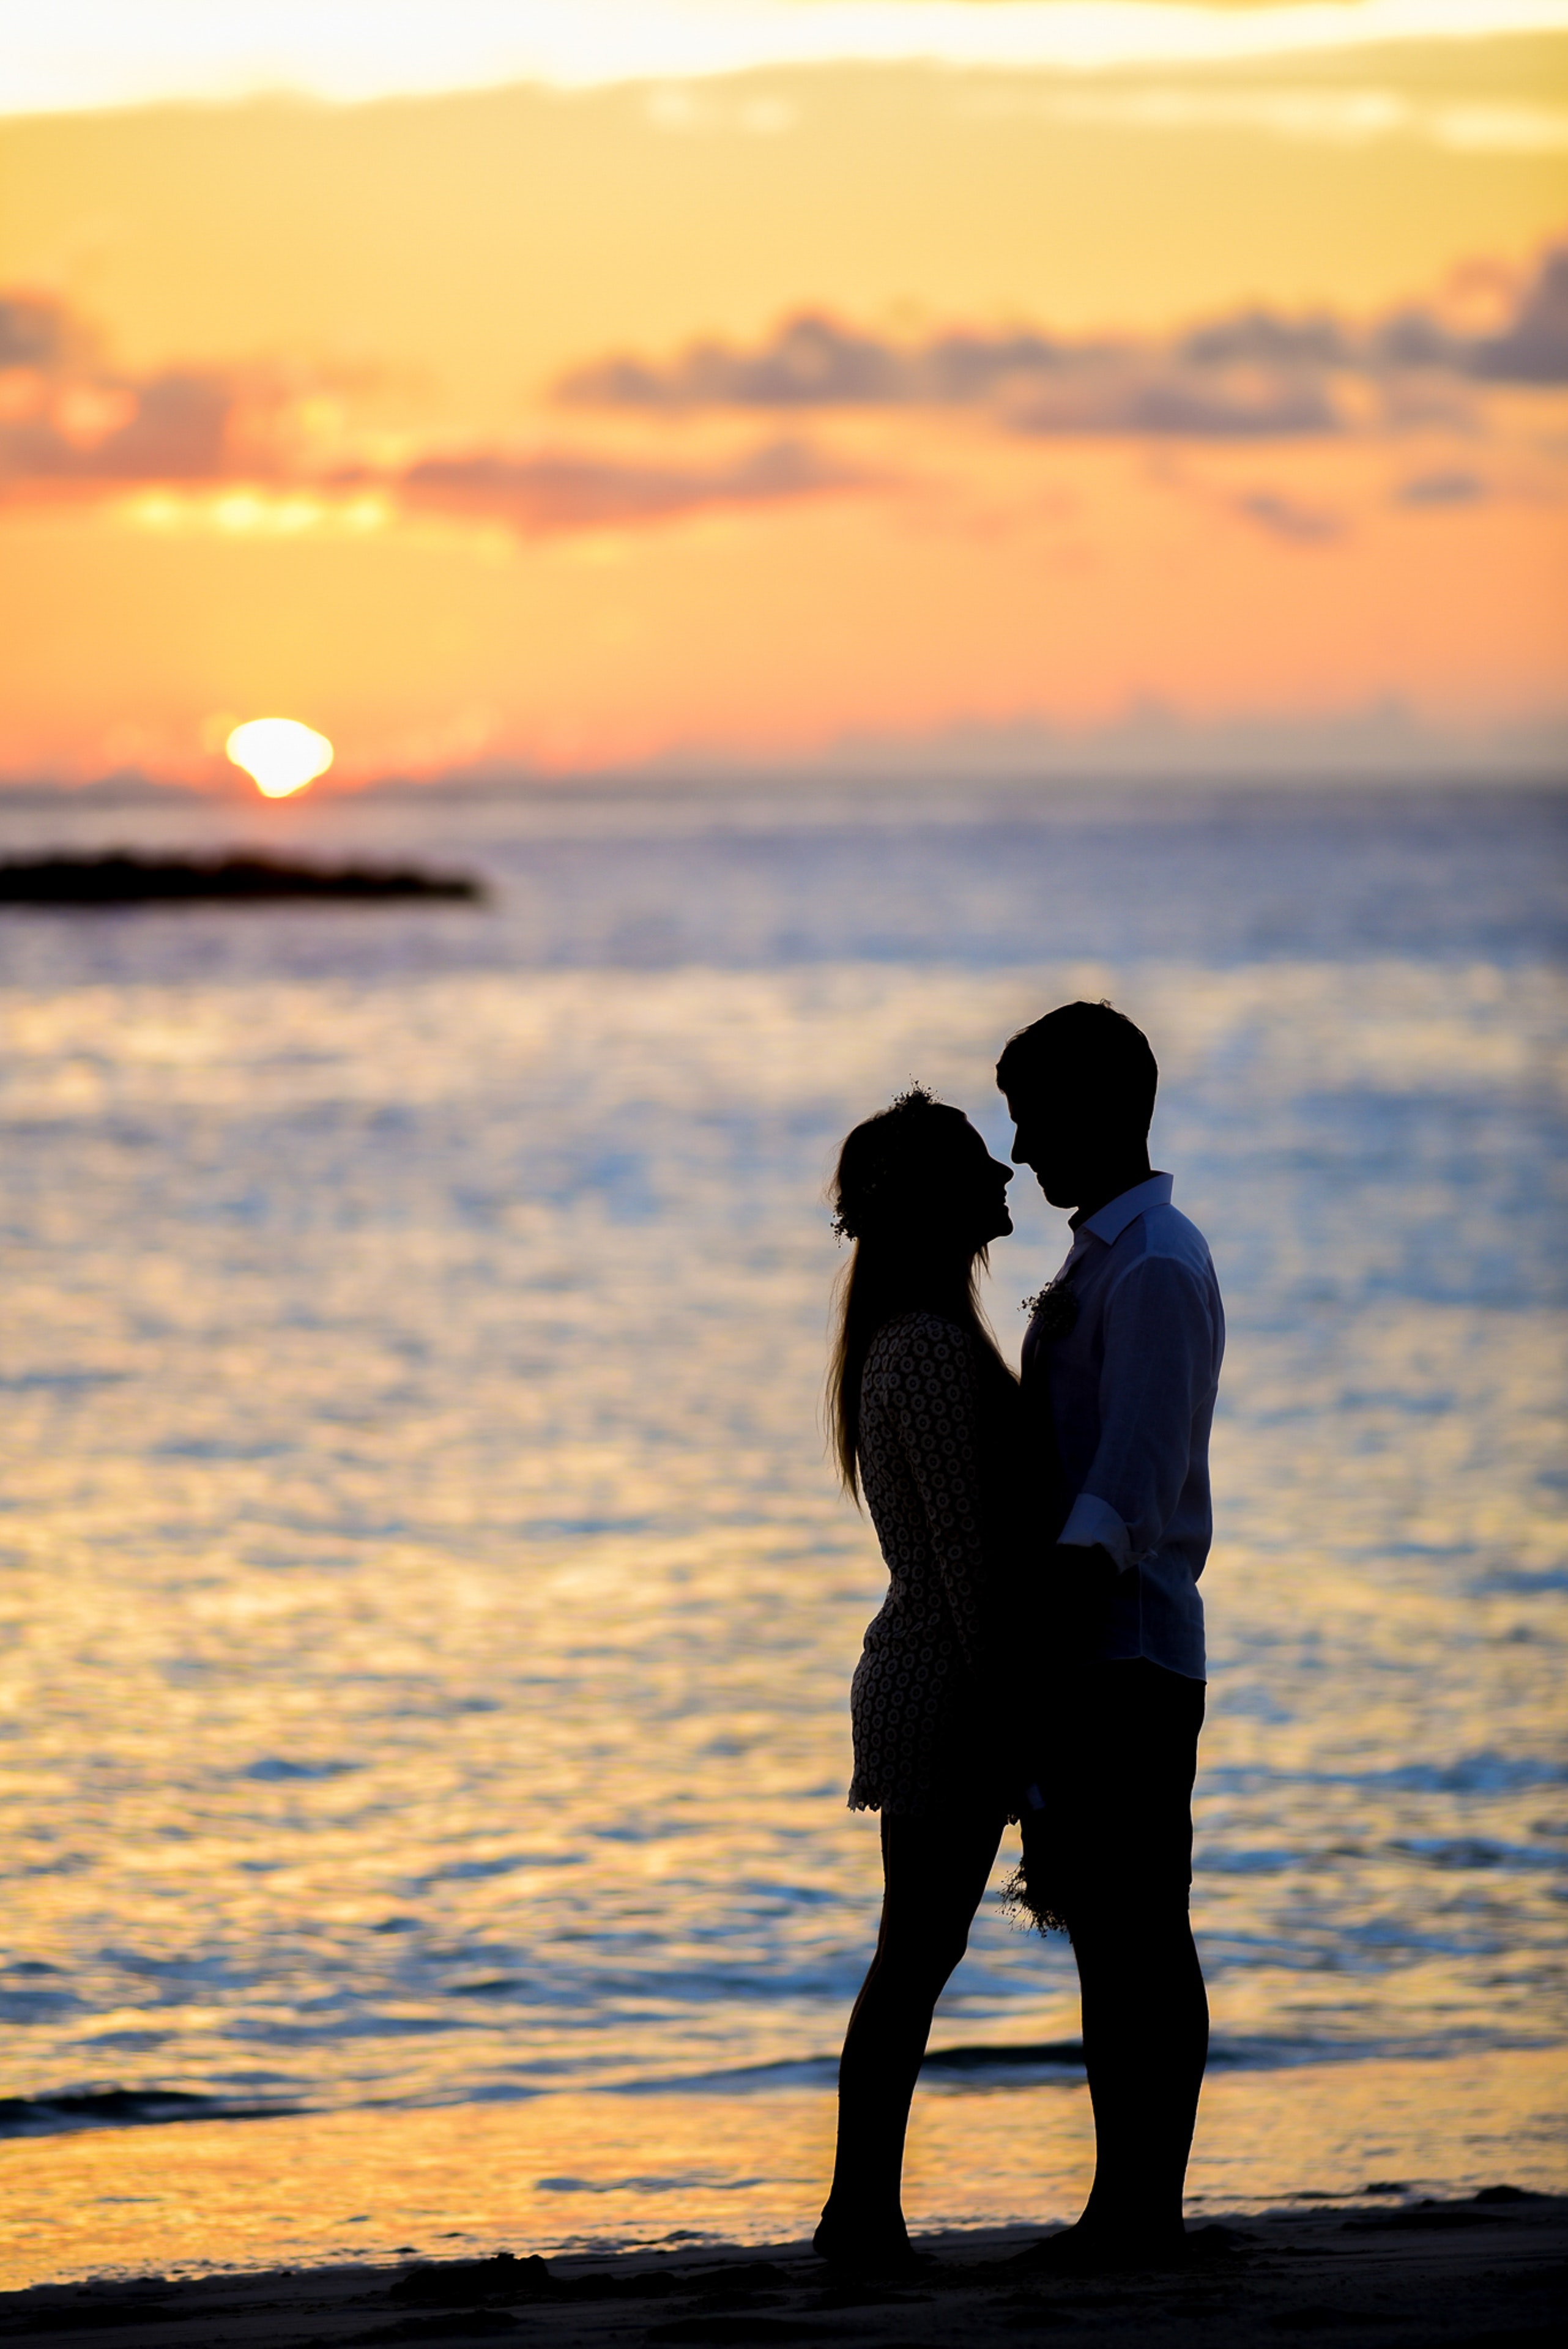 valentine's offer for maldives packages with couple silhouettes against the sunset